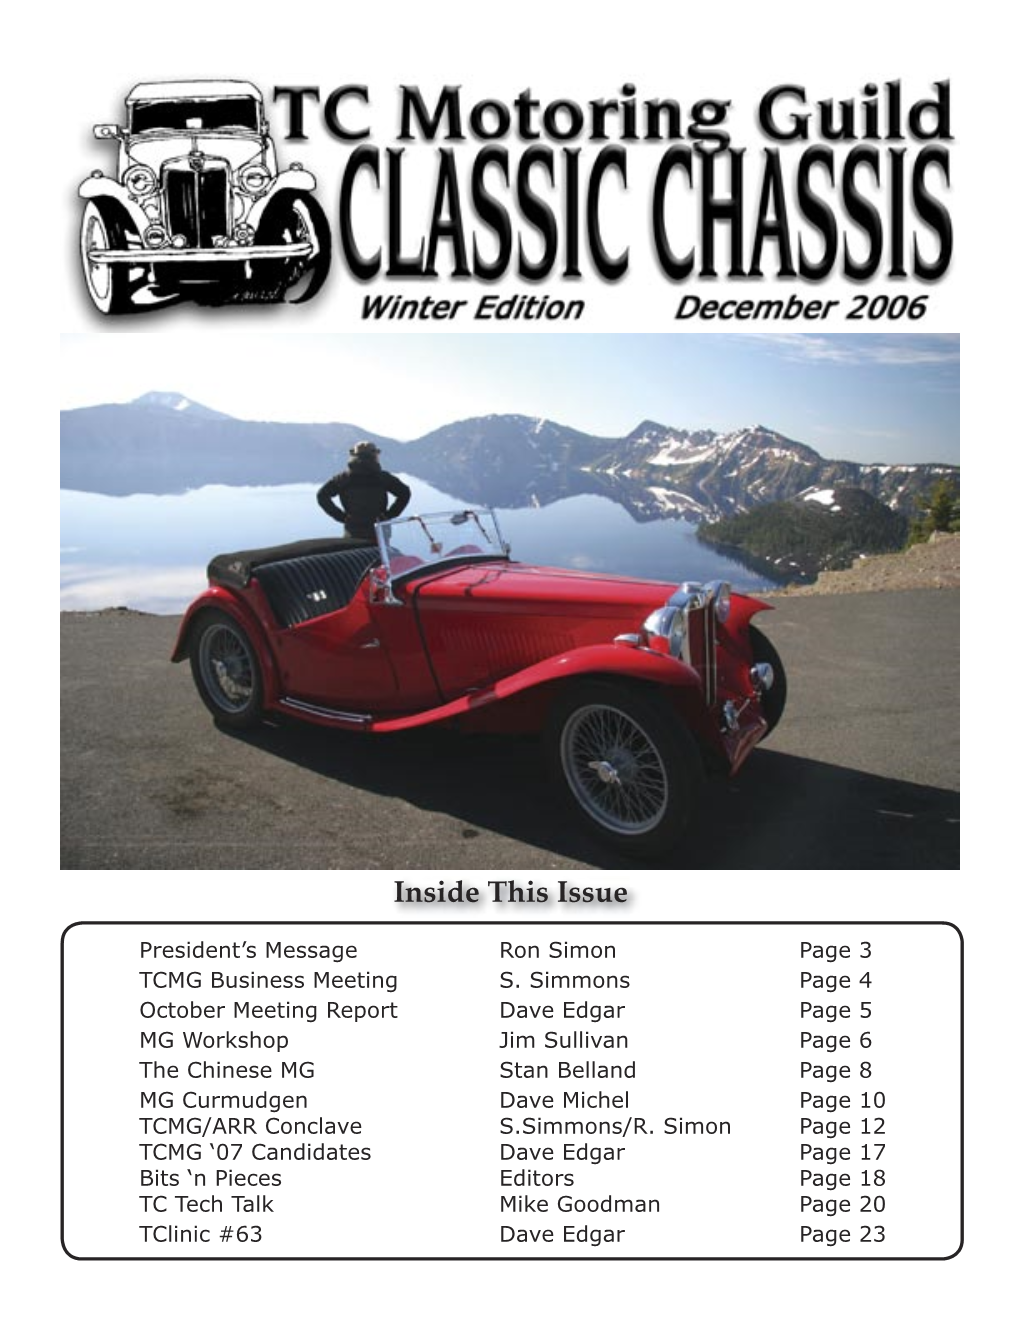 December Classic Chassis